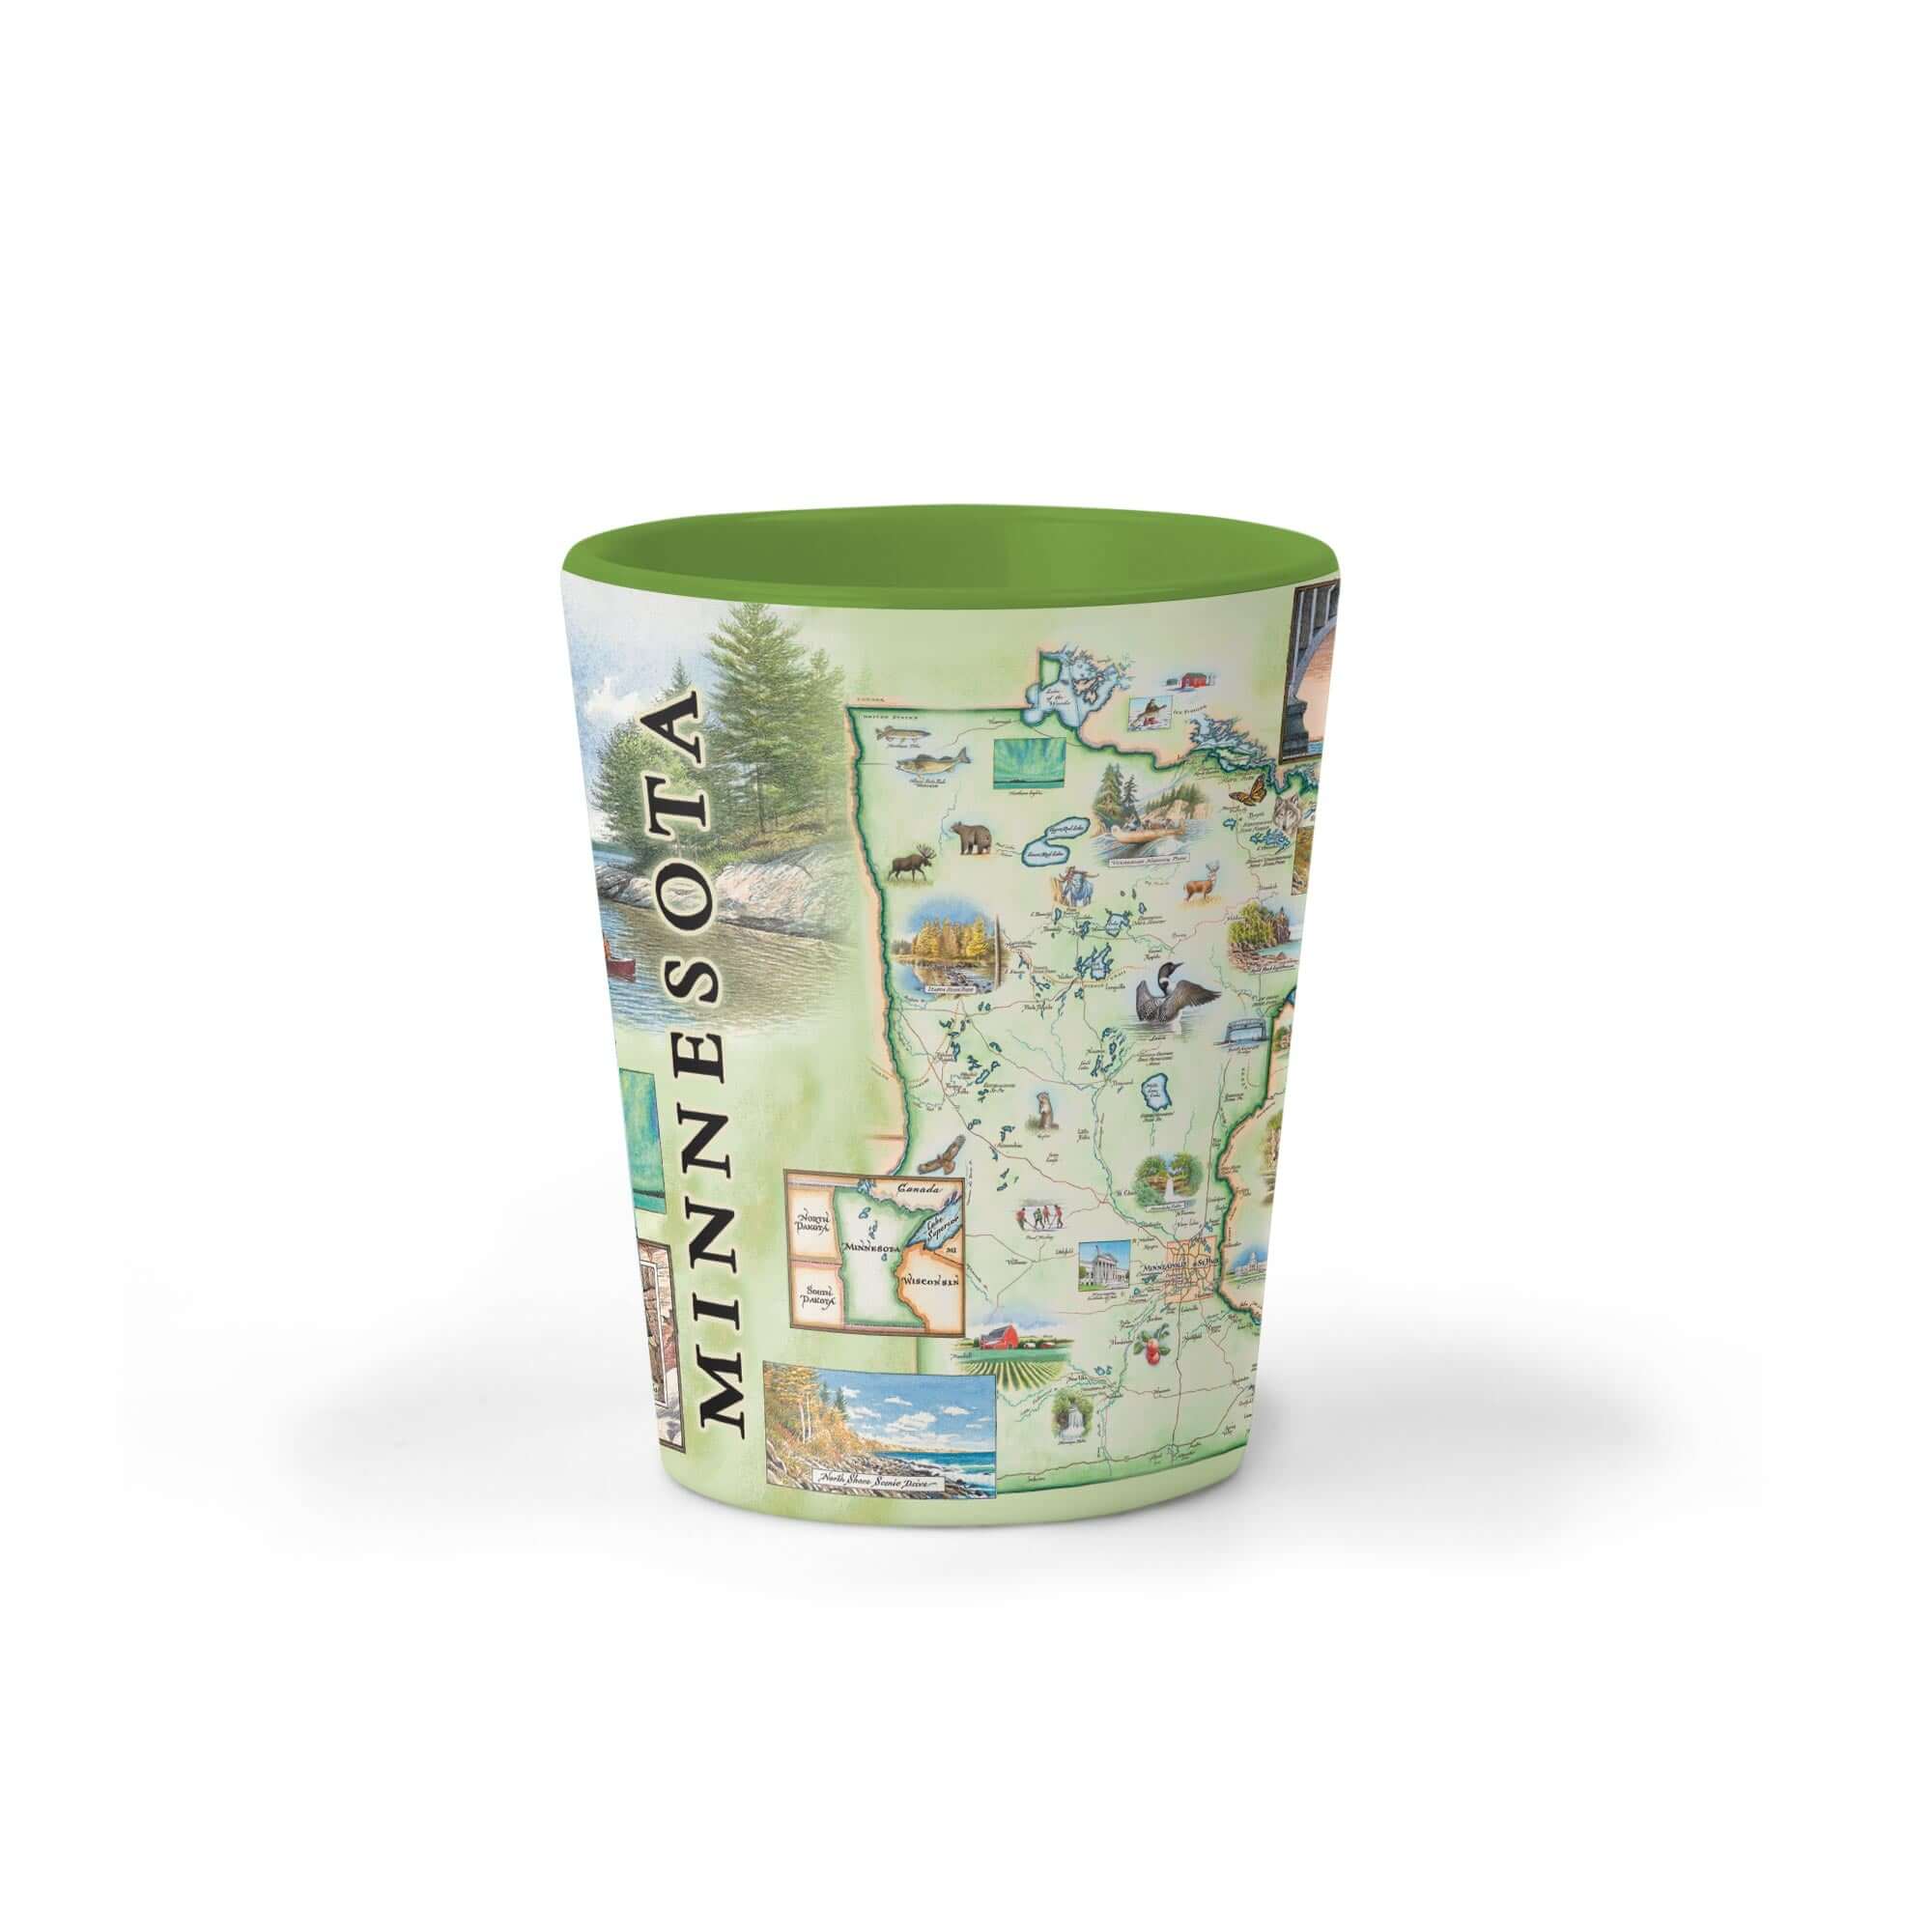 Toast to the Land of 10,000 Lakes with this 1.5 oz Minnesota ceramic shot glass. Adorned with charming illustrations of iconic landmarks, vibrant landscapes, and beloved wildlife, it's the perfect way to celebrate the beauty and spirit of Minnesota.